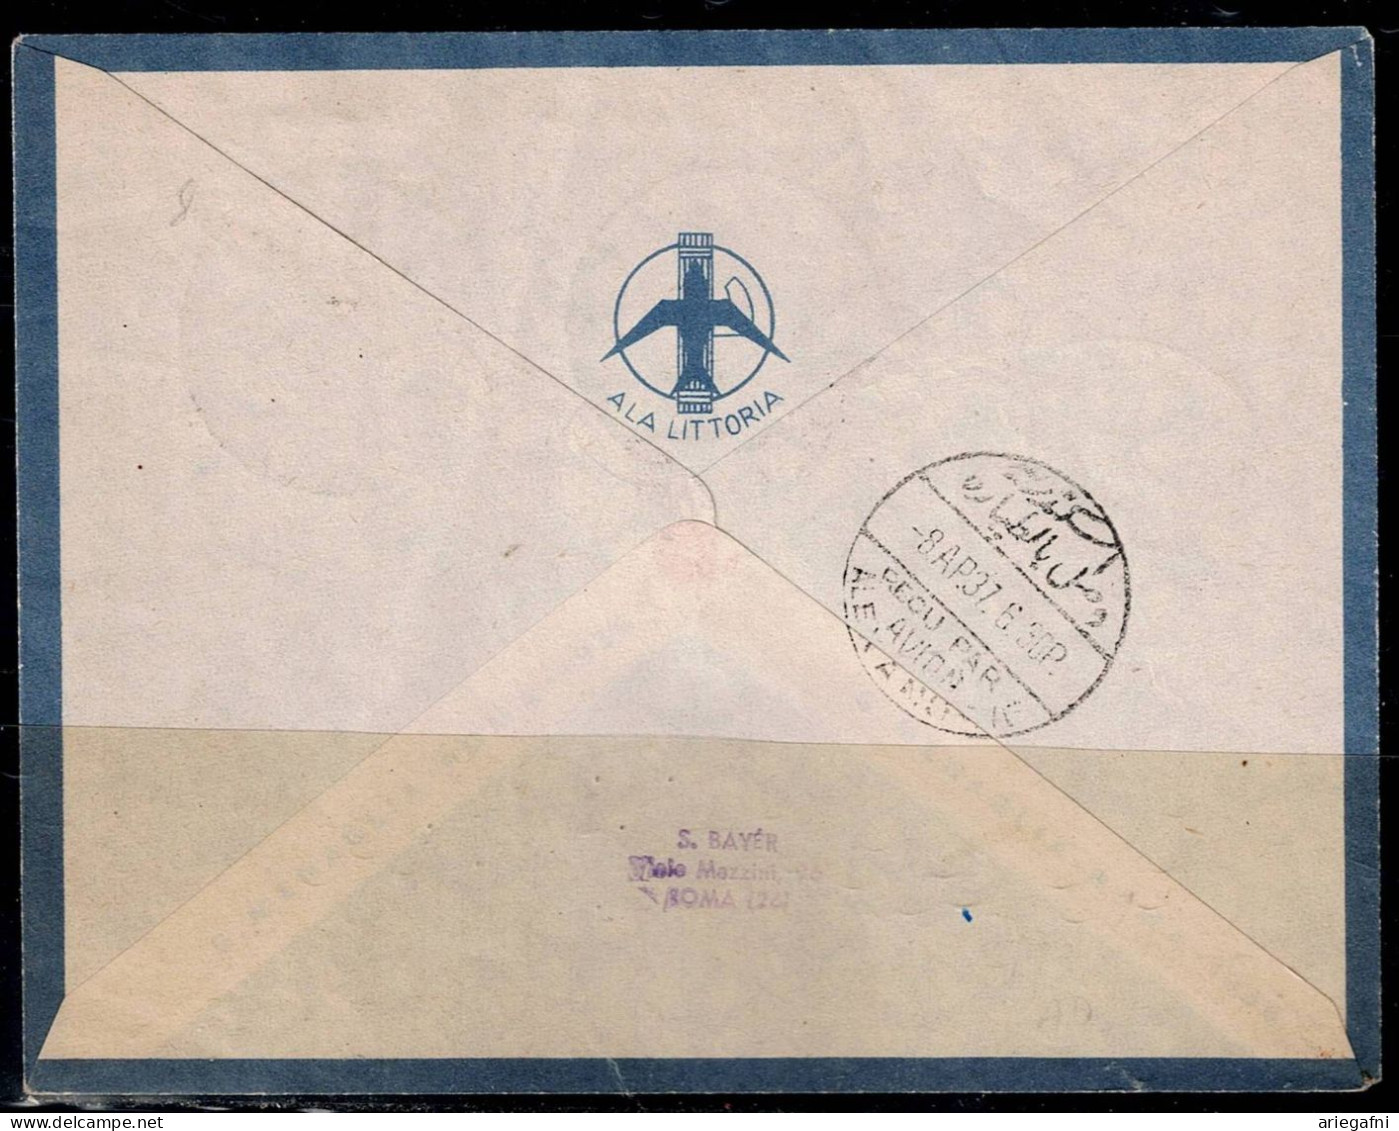 ISRAEL 1937 COVER FLYING BY AIR MAIL IN7/4/37 FROM ROMA VIA HAIFA TO ALESSANDRIA VF!! - Luchtpost